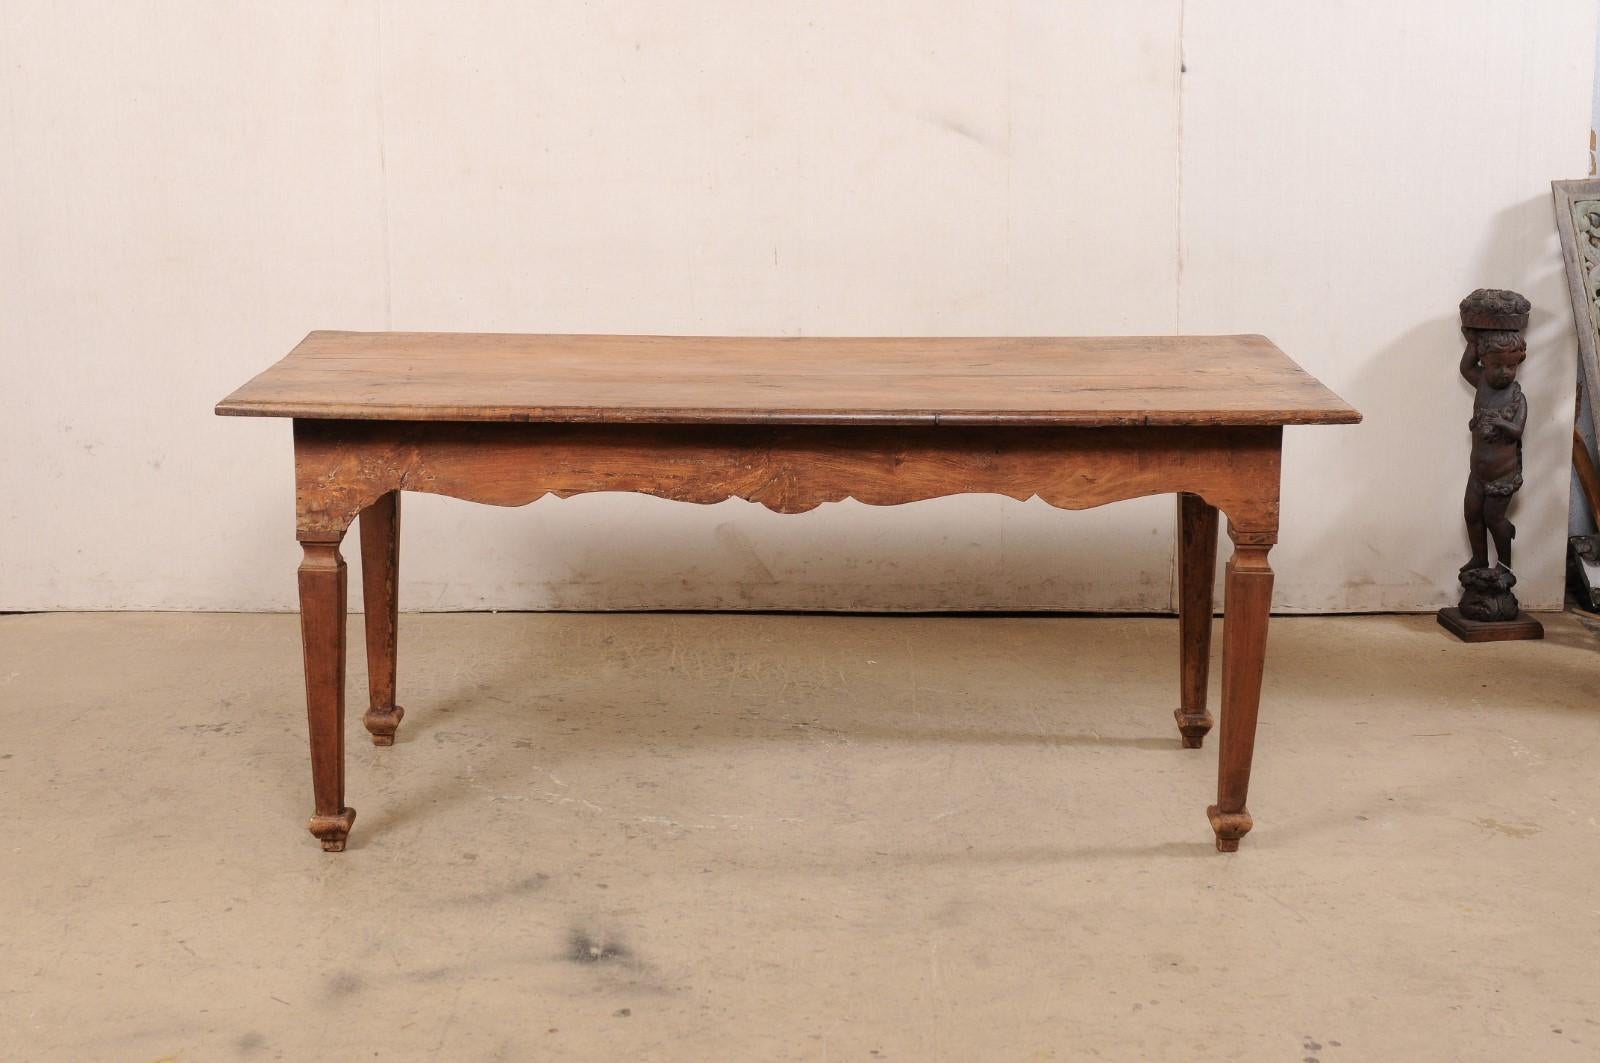 A Late 18th C. Italian Walnut Farm Table with Carved Skirt, 6 Ft Long For Sale 7